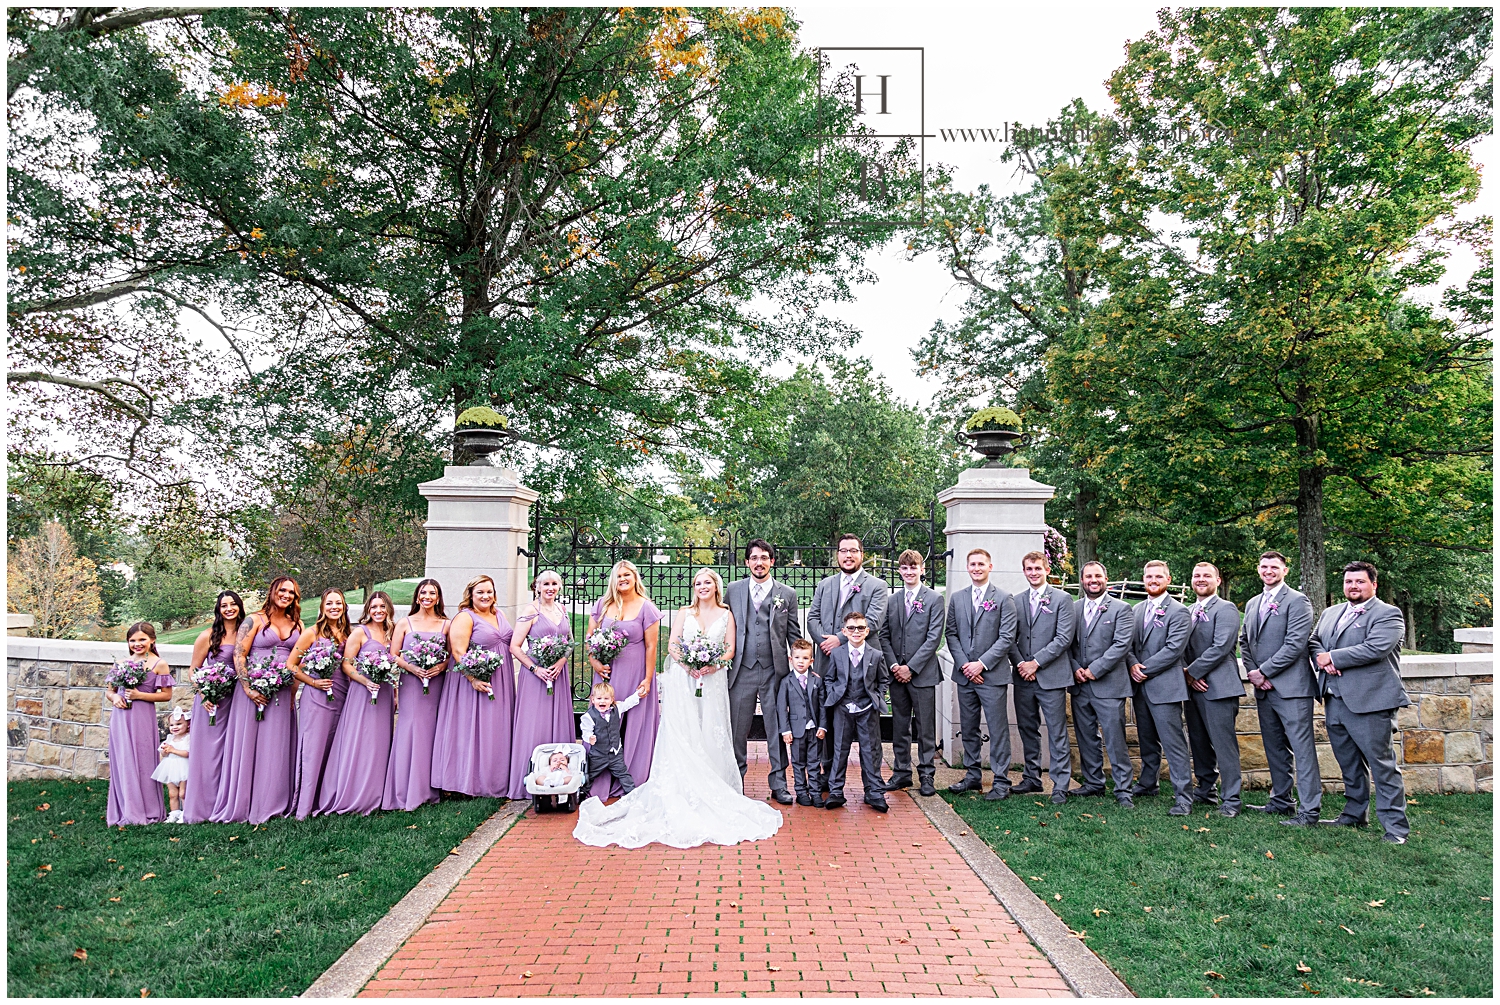 Full bridal party in purple dresses and grey tuxes stands for portrait.